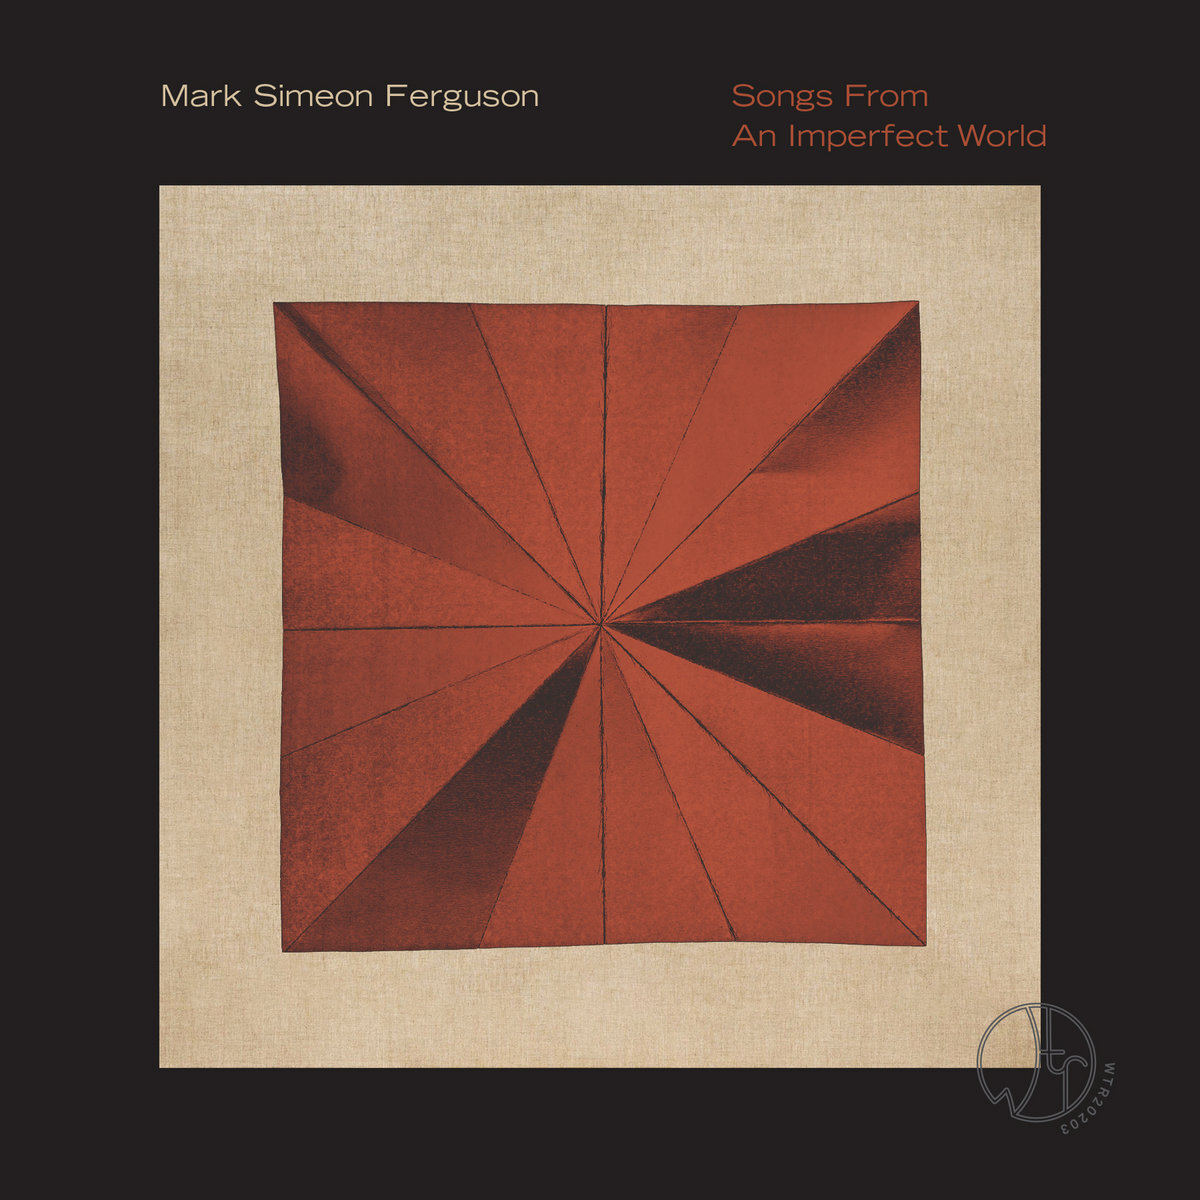 Mark Simeon Ferguson - "Songs From An Imperfect World" [Recorded & Mixed (JB), Mastered (JP), Produced (AP), WTR]